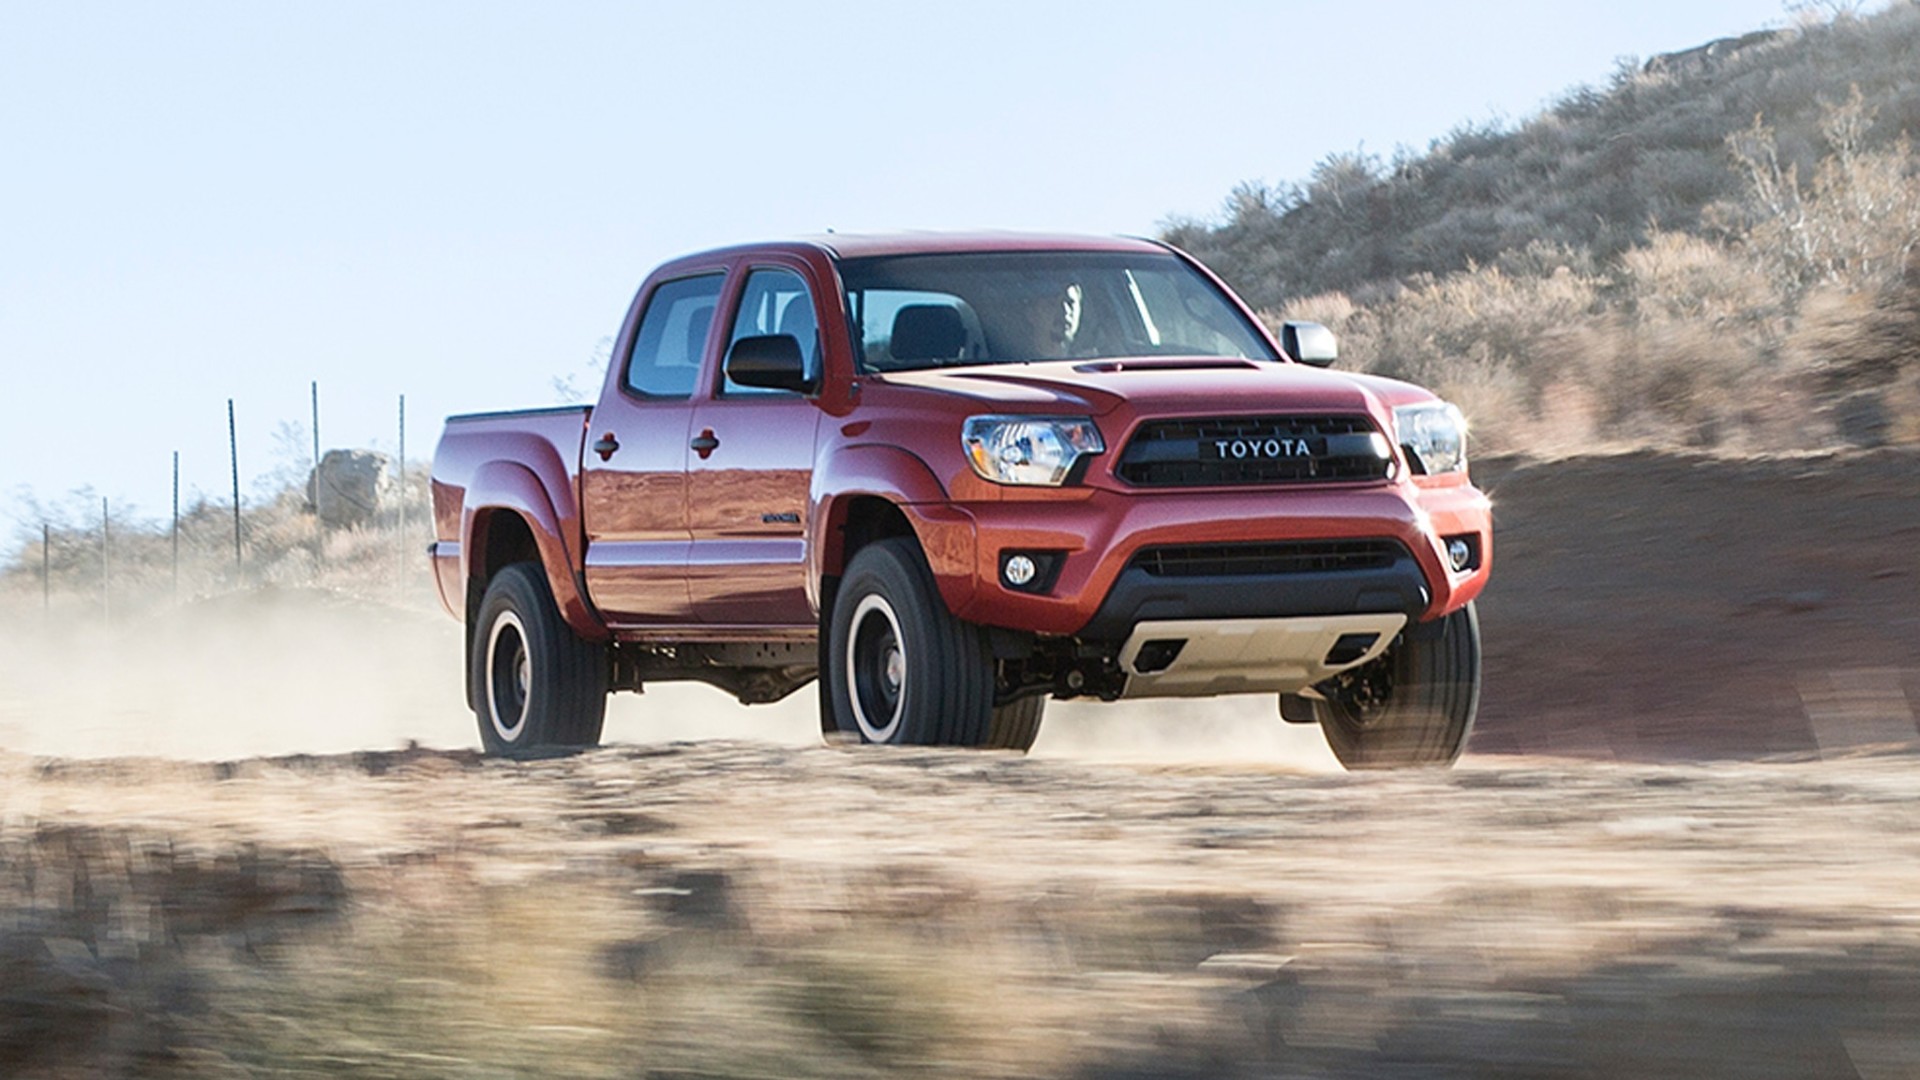  Toyota Tacoma Wallpapers HD Wallpapers Pictures